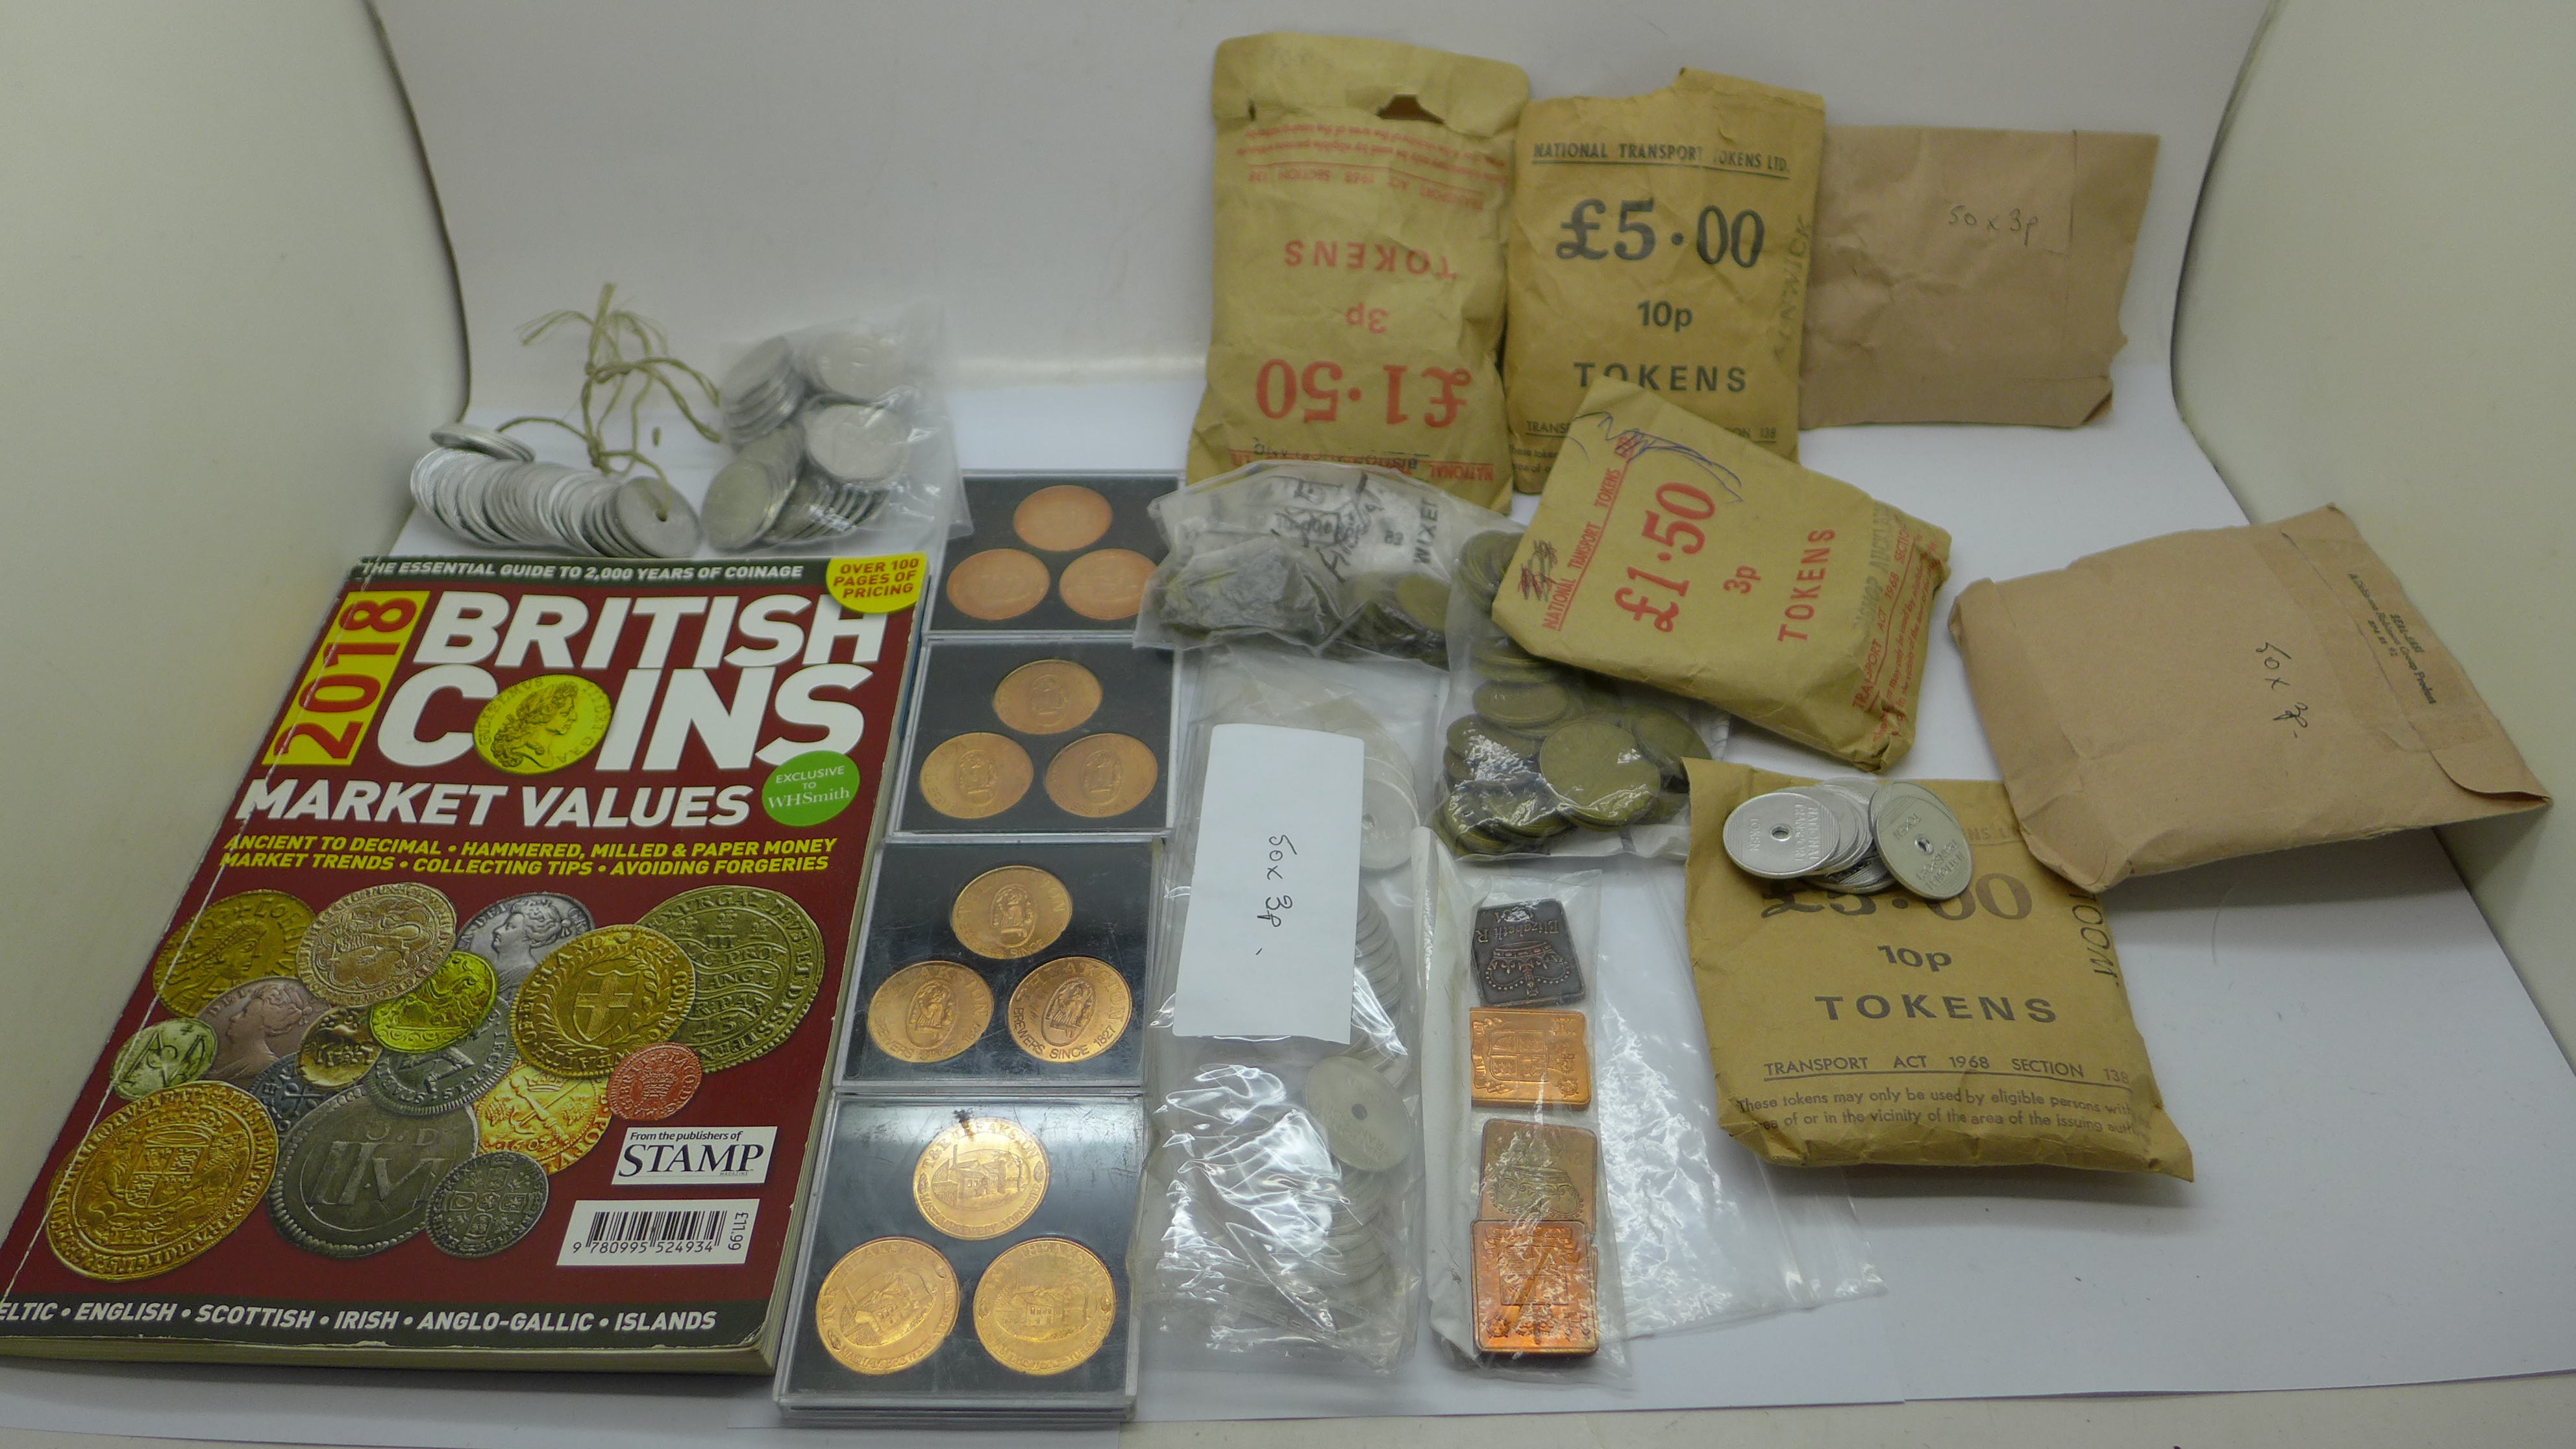 Aluminium National Transport tokens, other tokens and a coin catalogue